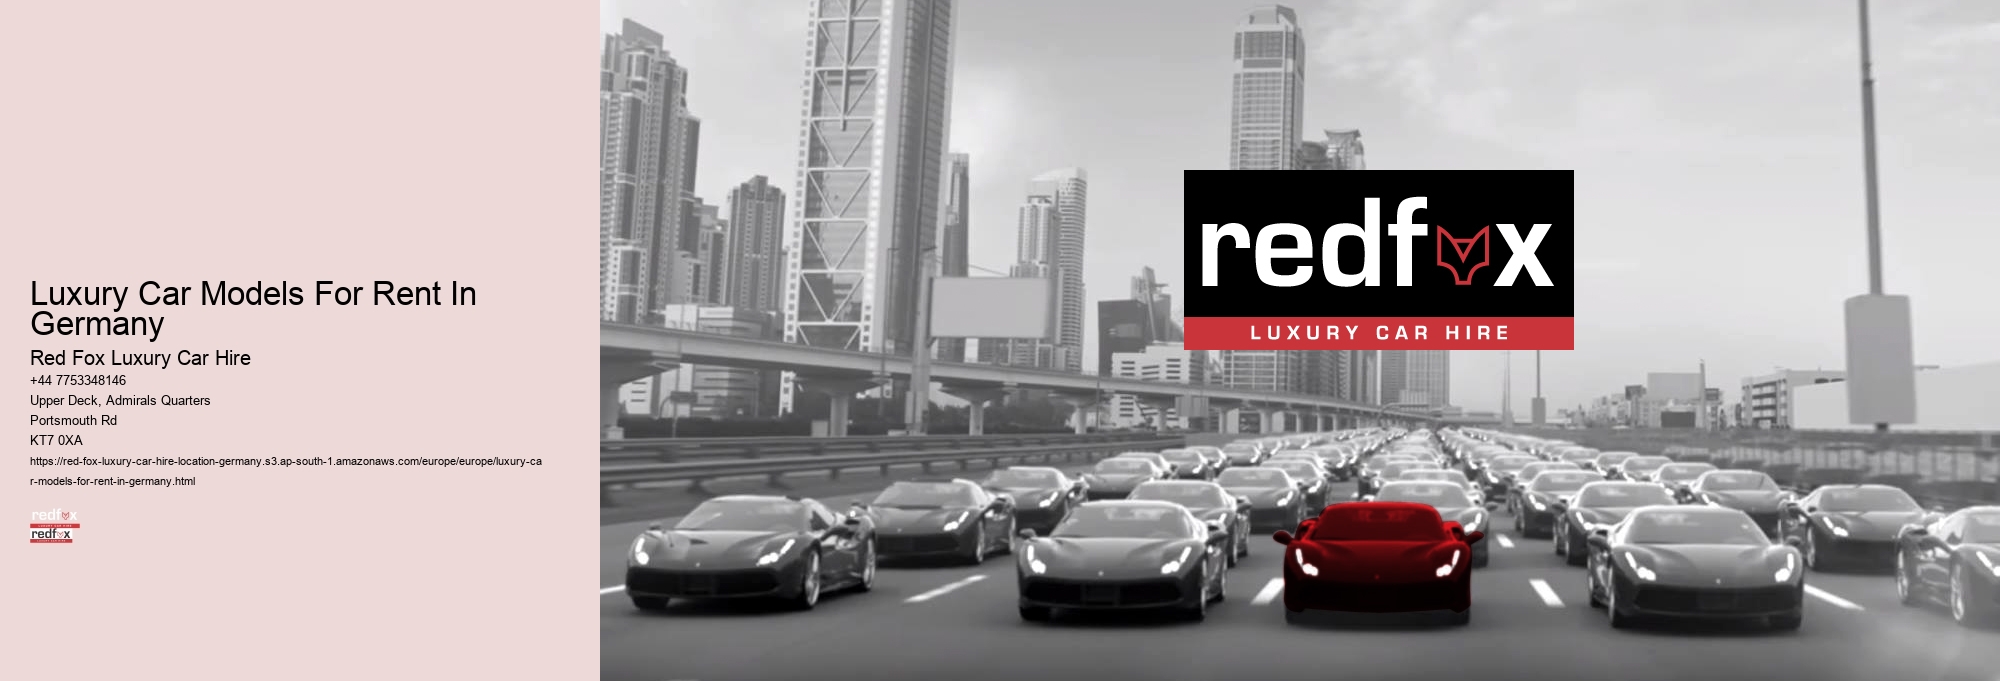 Luxury Car Models For Rent In Germany